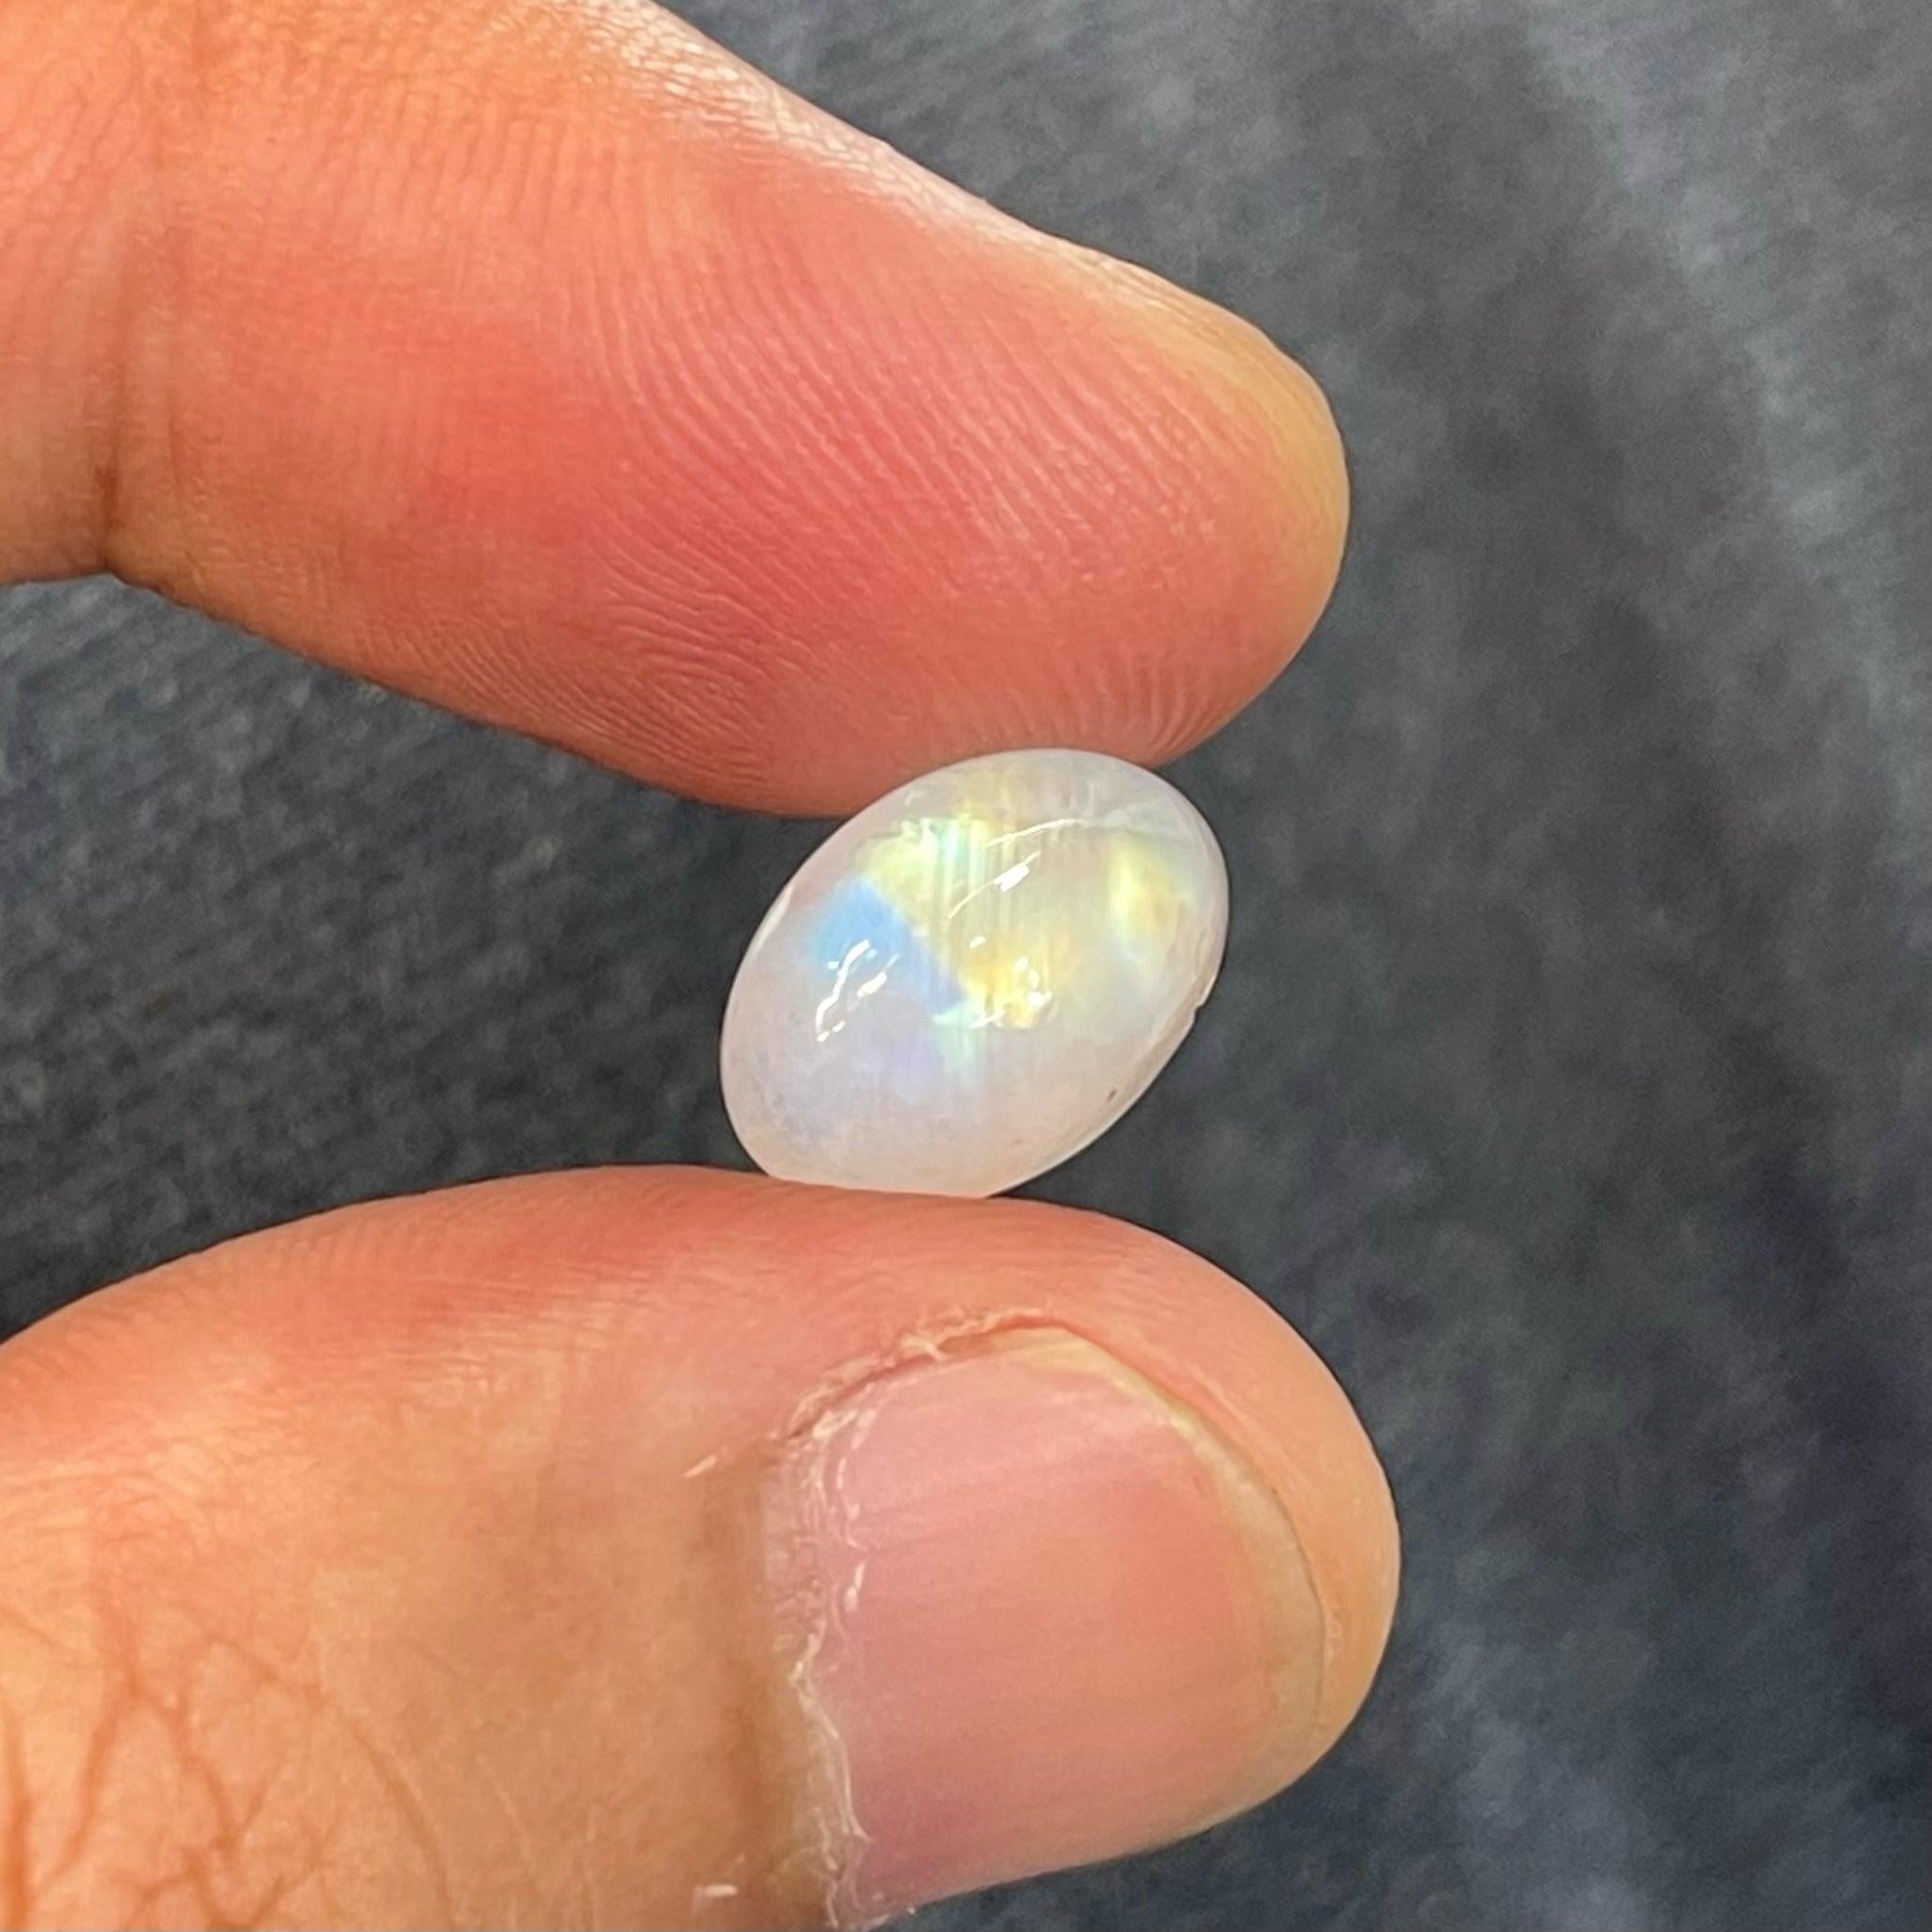 Lovely Natural Loose Moonstone Gem, available for sale at wholesale price, natural high-quality 6.60 carats flawless Diaphaneity translucent clarity, certified Moonstone from India.

Product Information:
GEMSTONE NAME: Lovely Natural Loose Moonstone